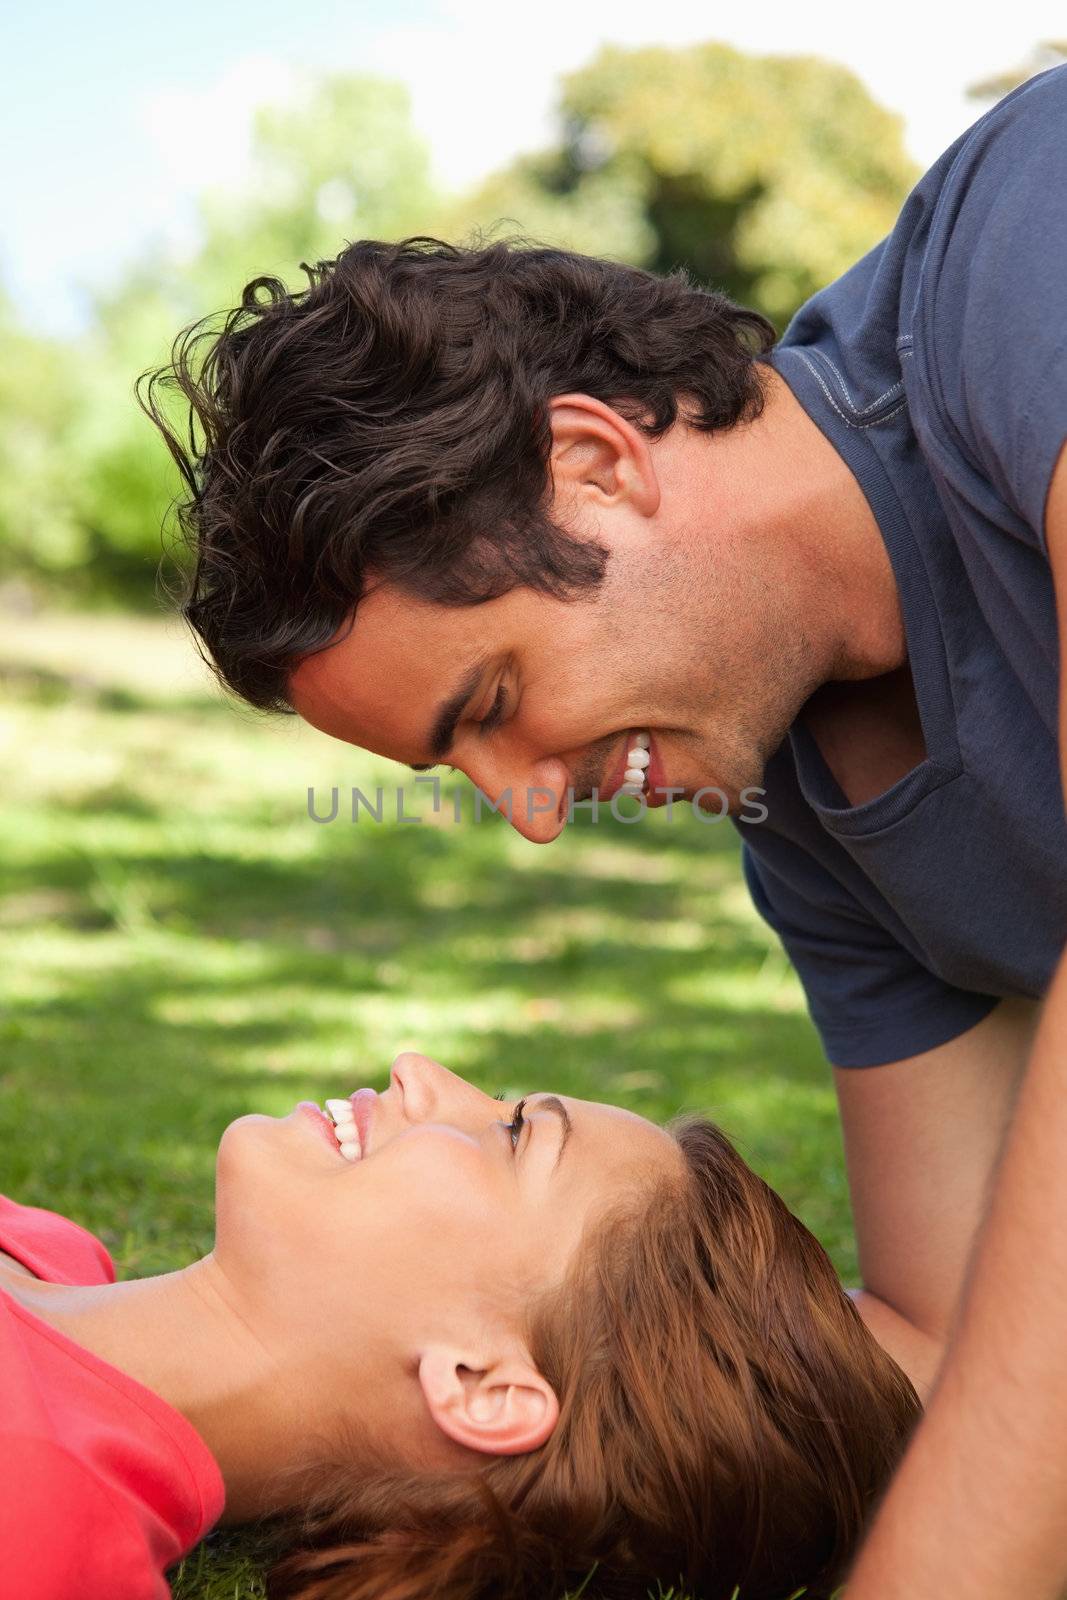 Man smiling as he looks down towards his smiling friend who is lying on the grass